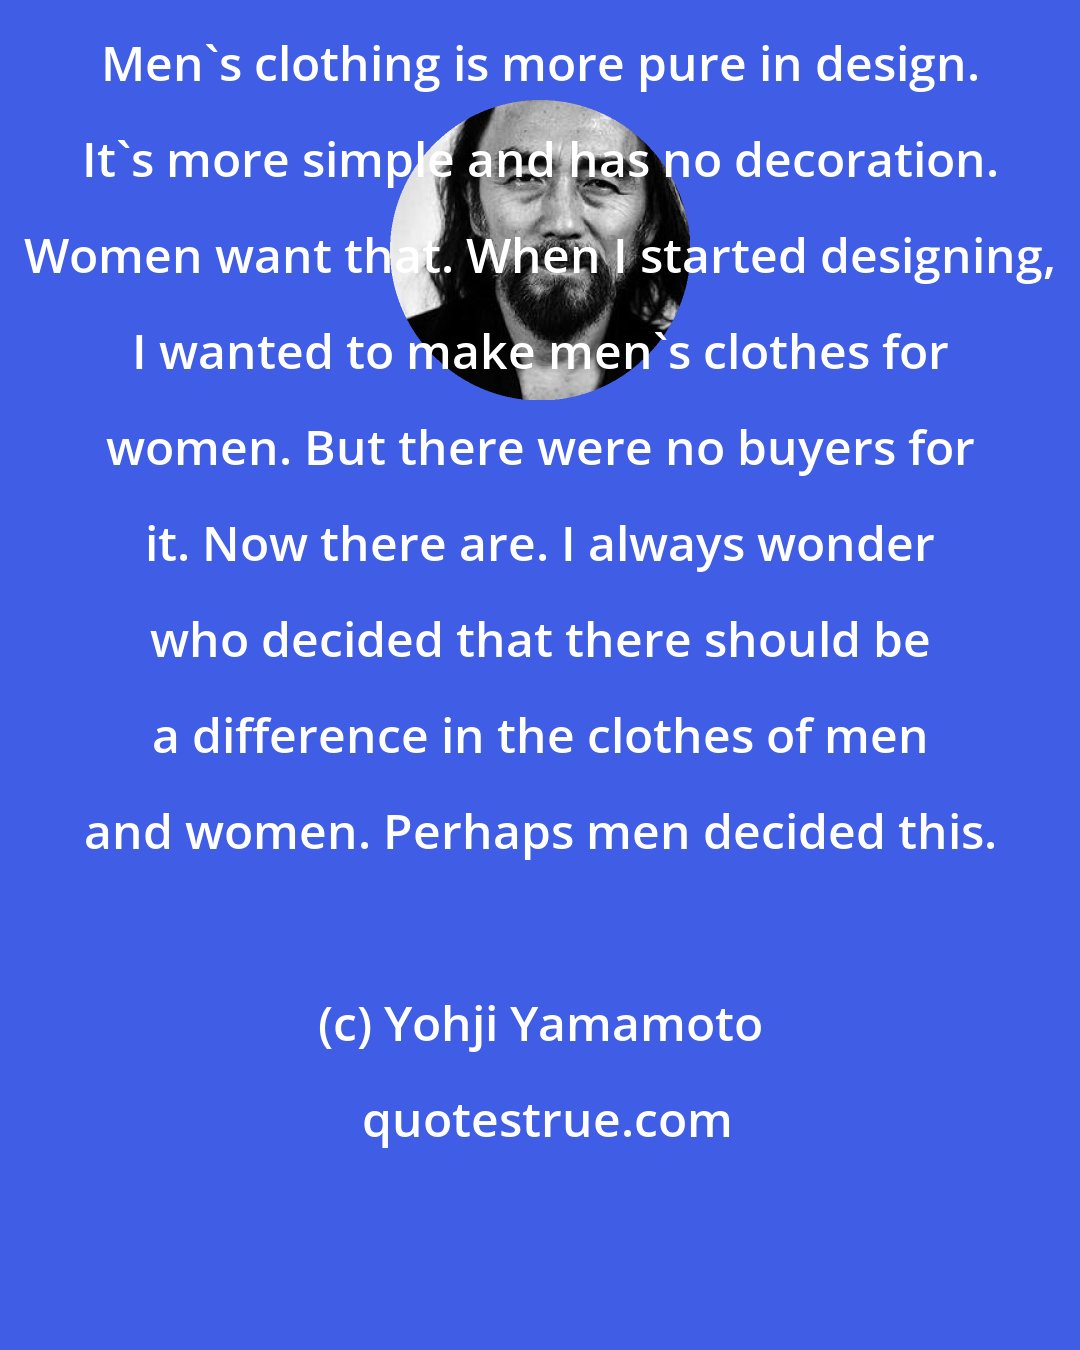 Yohji Yamamoto: Men's clothing is more pure in design. It's more simple and has no decoration. Women want that. When I started designing, I wanted to make men's clothes for women. But there were no buyers for it. Now there are. I always wonder who decided that there should be a difference in the clothes of men and women. Perhaps men decided this.